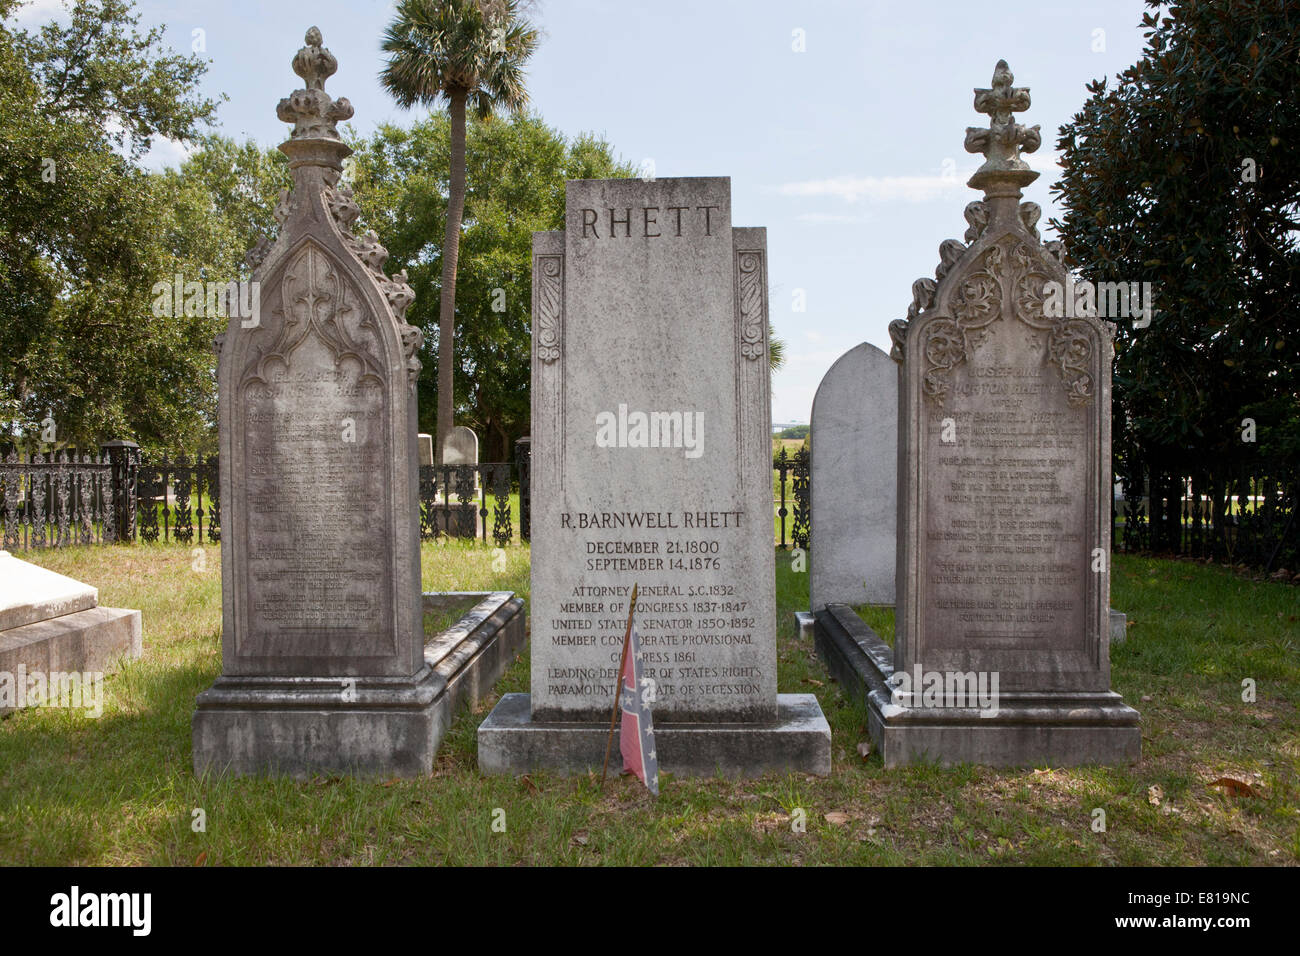 Grave of R. Barnwell Rhett, prominent politician of South Carolina and the Confederacy. Stock Photo